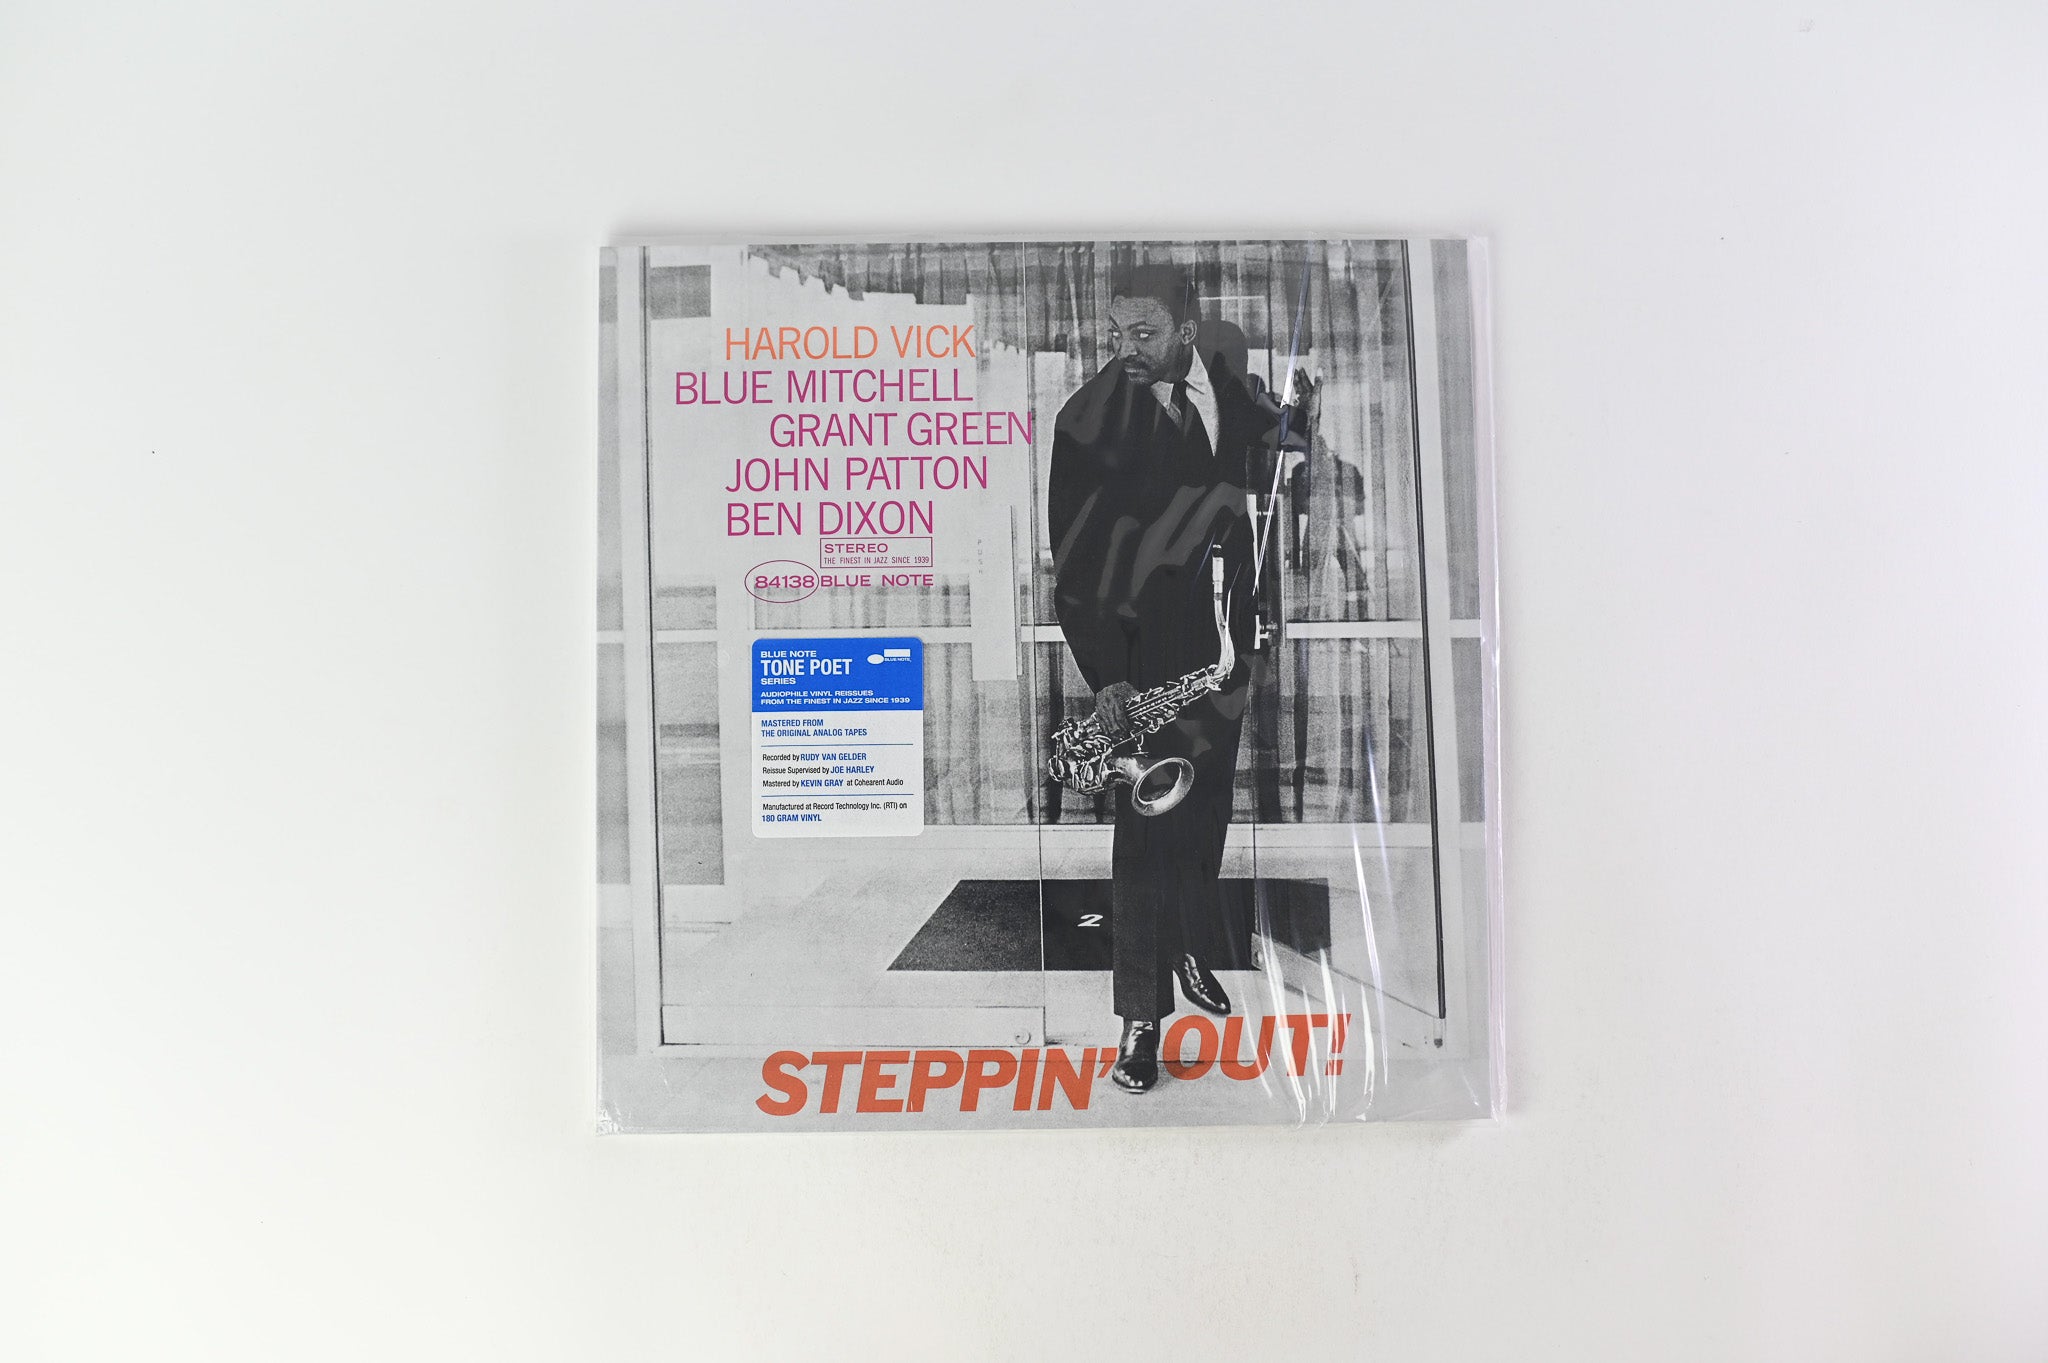 Harold Vick - Steppin' Out! on Blue Note Tone Poet Series